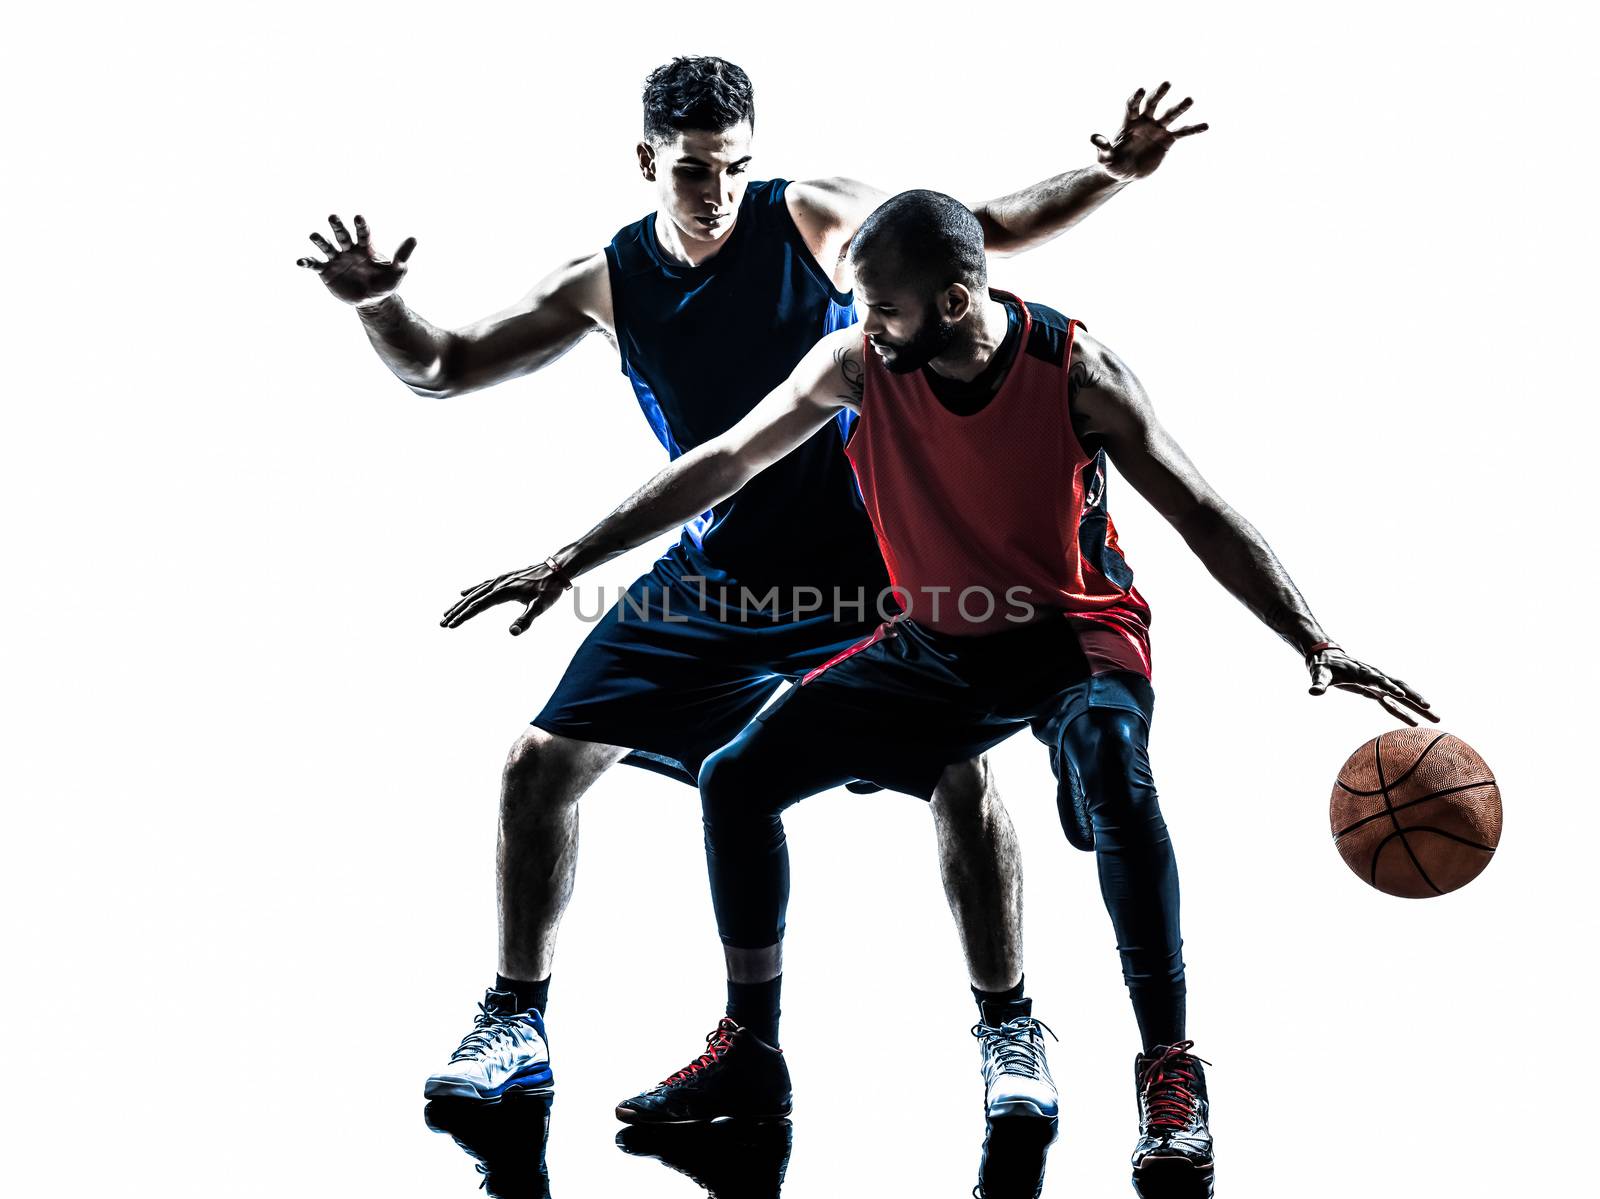 two men basketball players competition in silhouette isolated white background